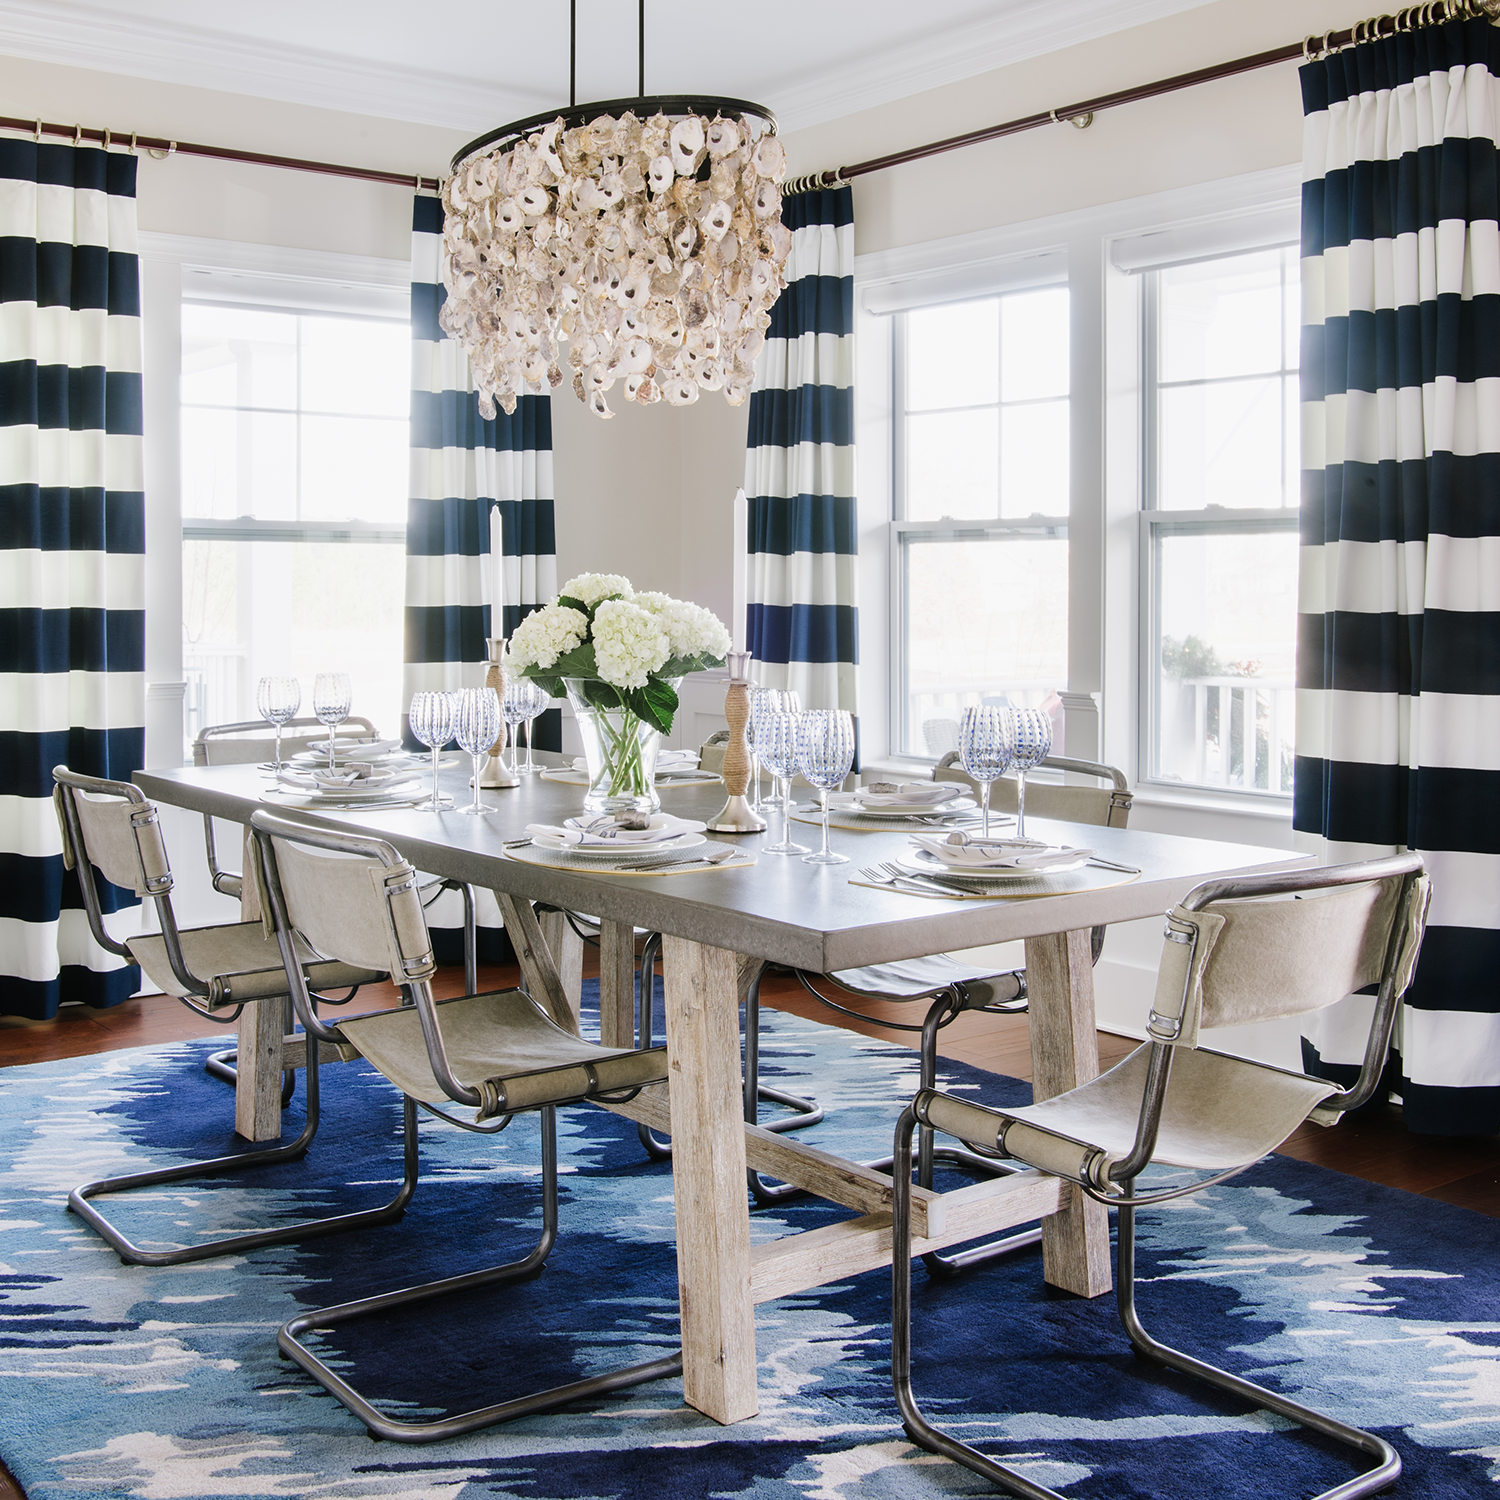 Coastal style dining room with canvas dining chairs and oyster shell chandelier